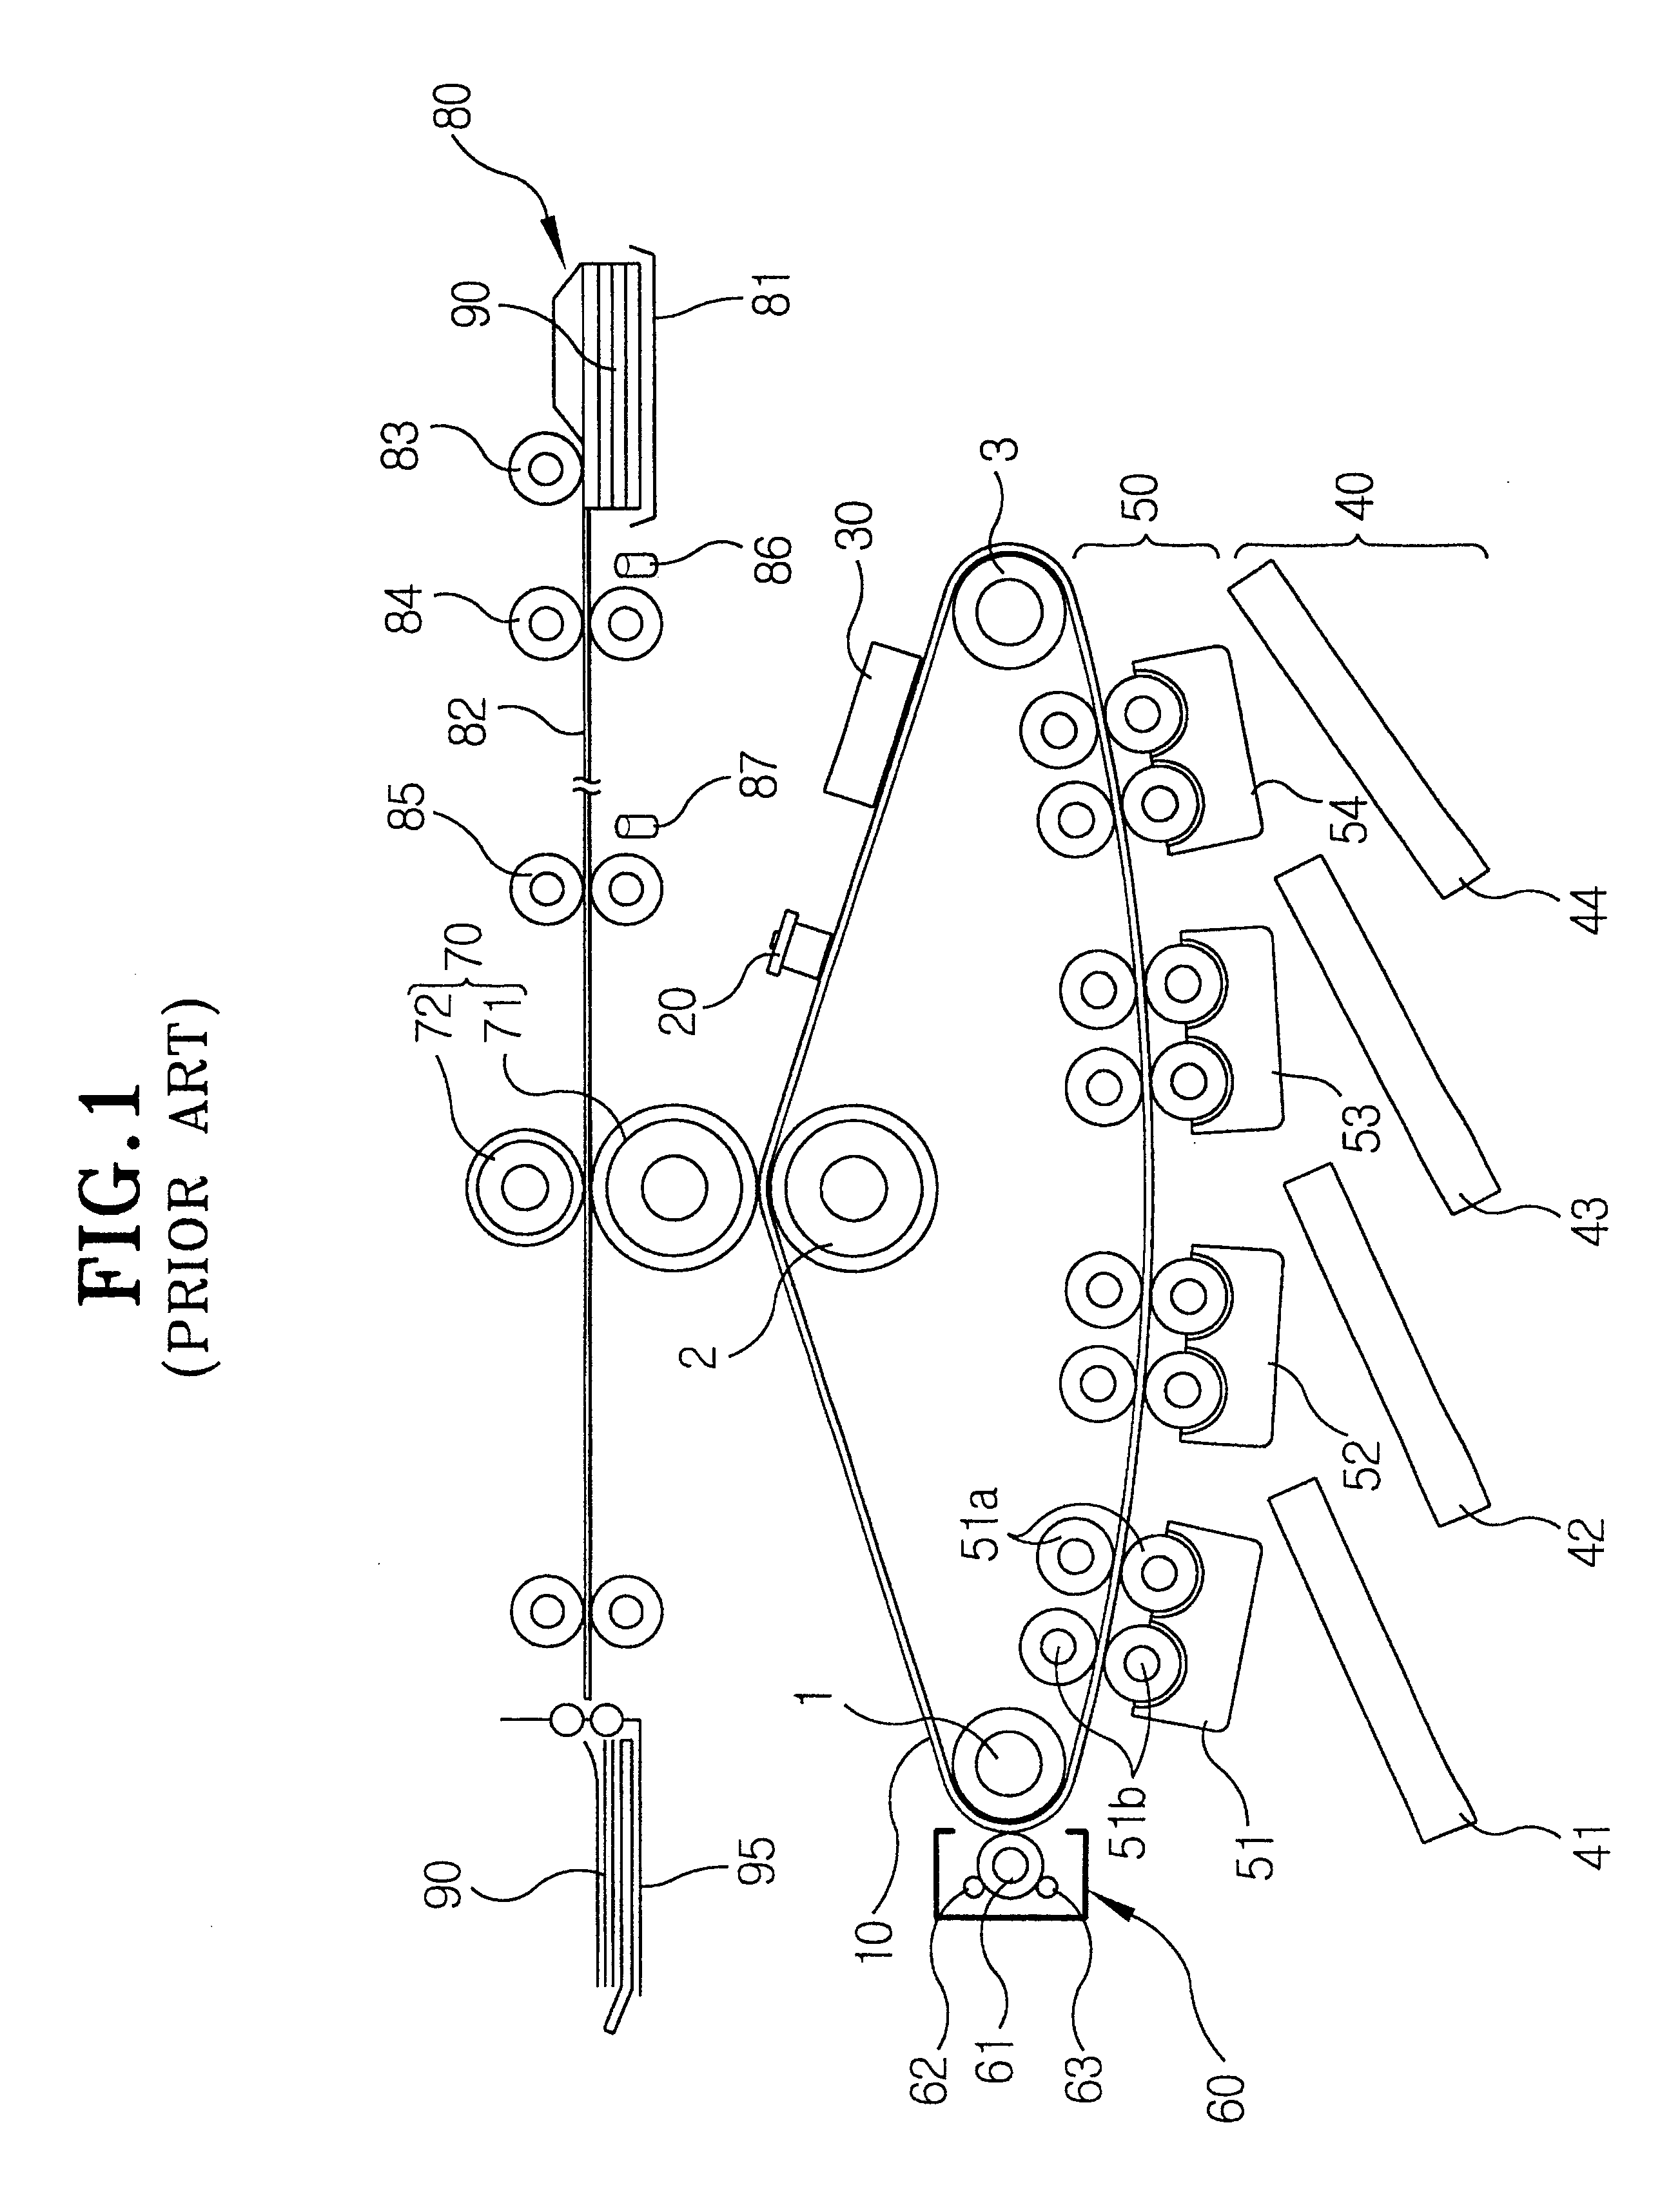 Image printing apparatus and a control method thereof